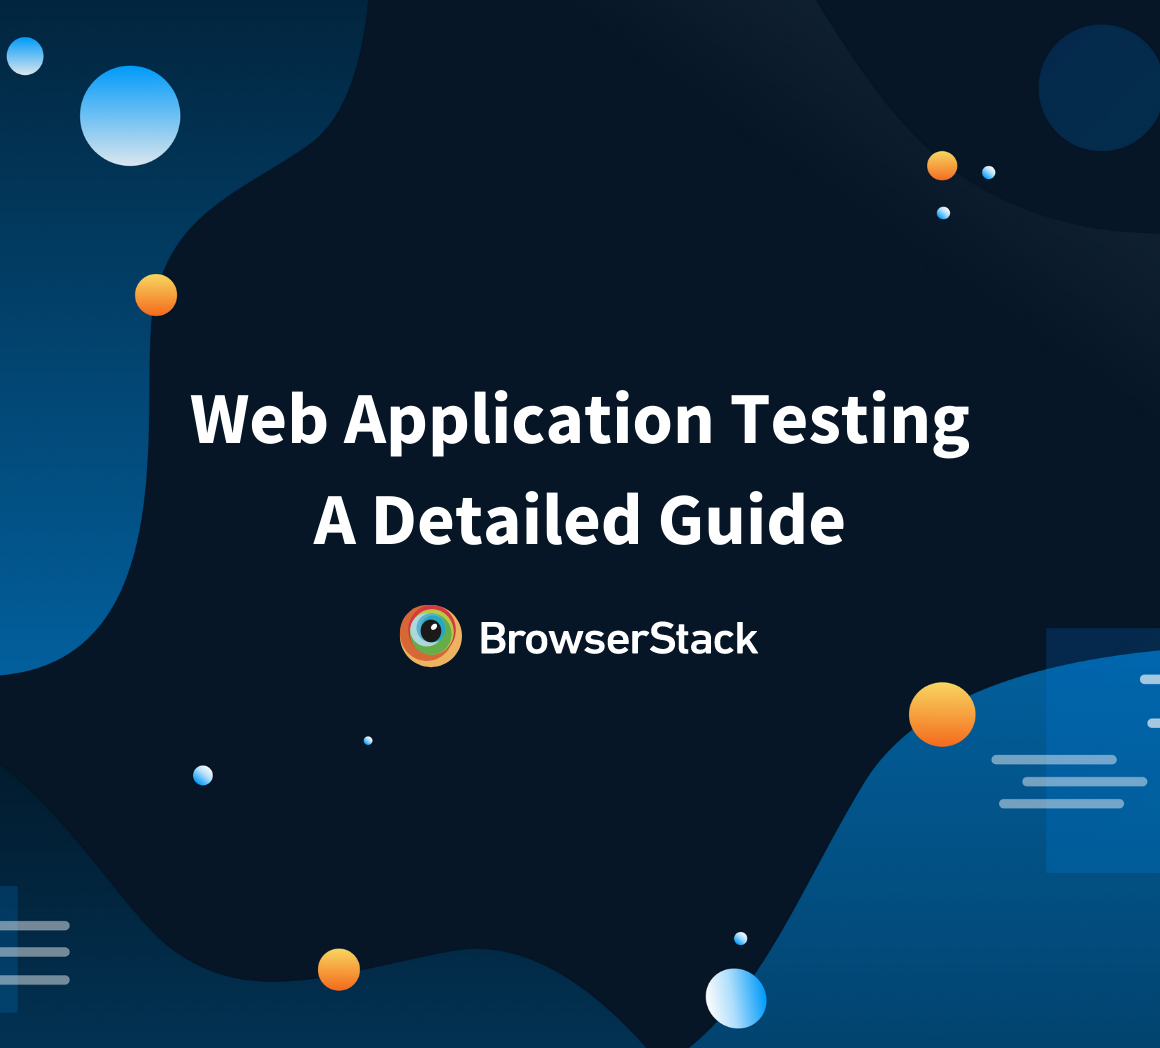 Web Application Testing: A Detailed Guide